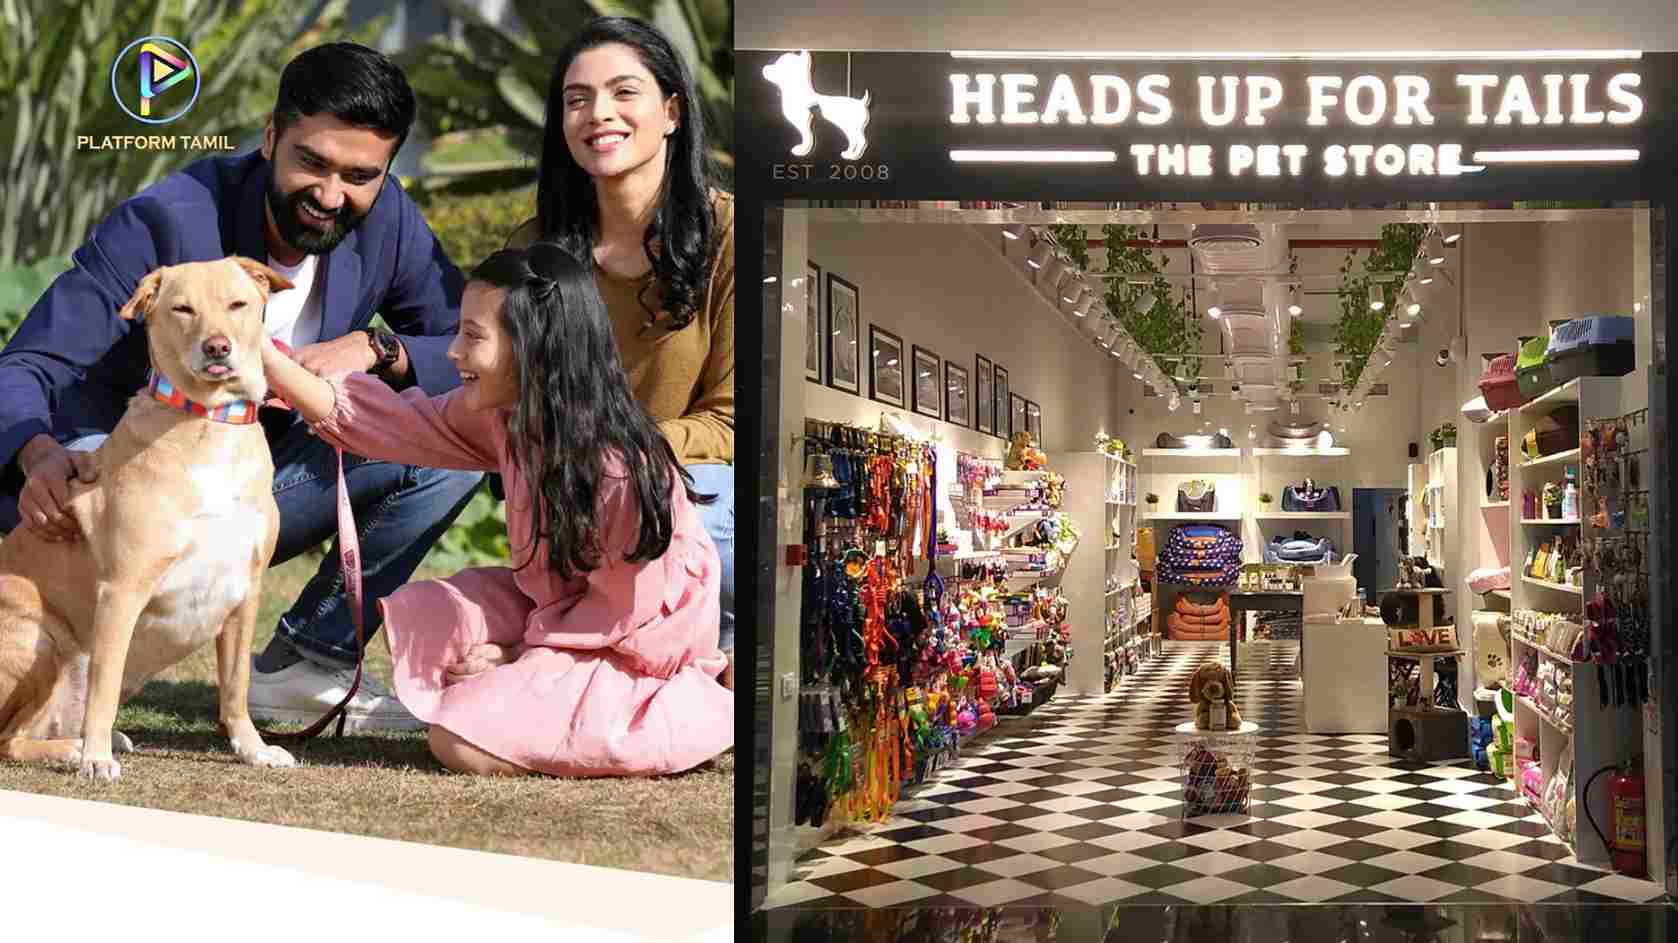 HEADS UP FOR TAILS (HUFT) - EVERYTHING YOUR PET  NEEDS - Platform Tamil